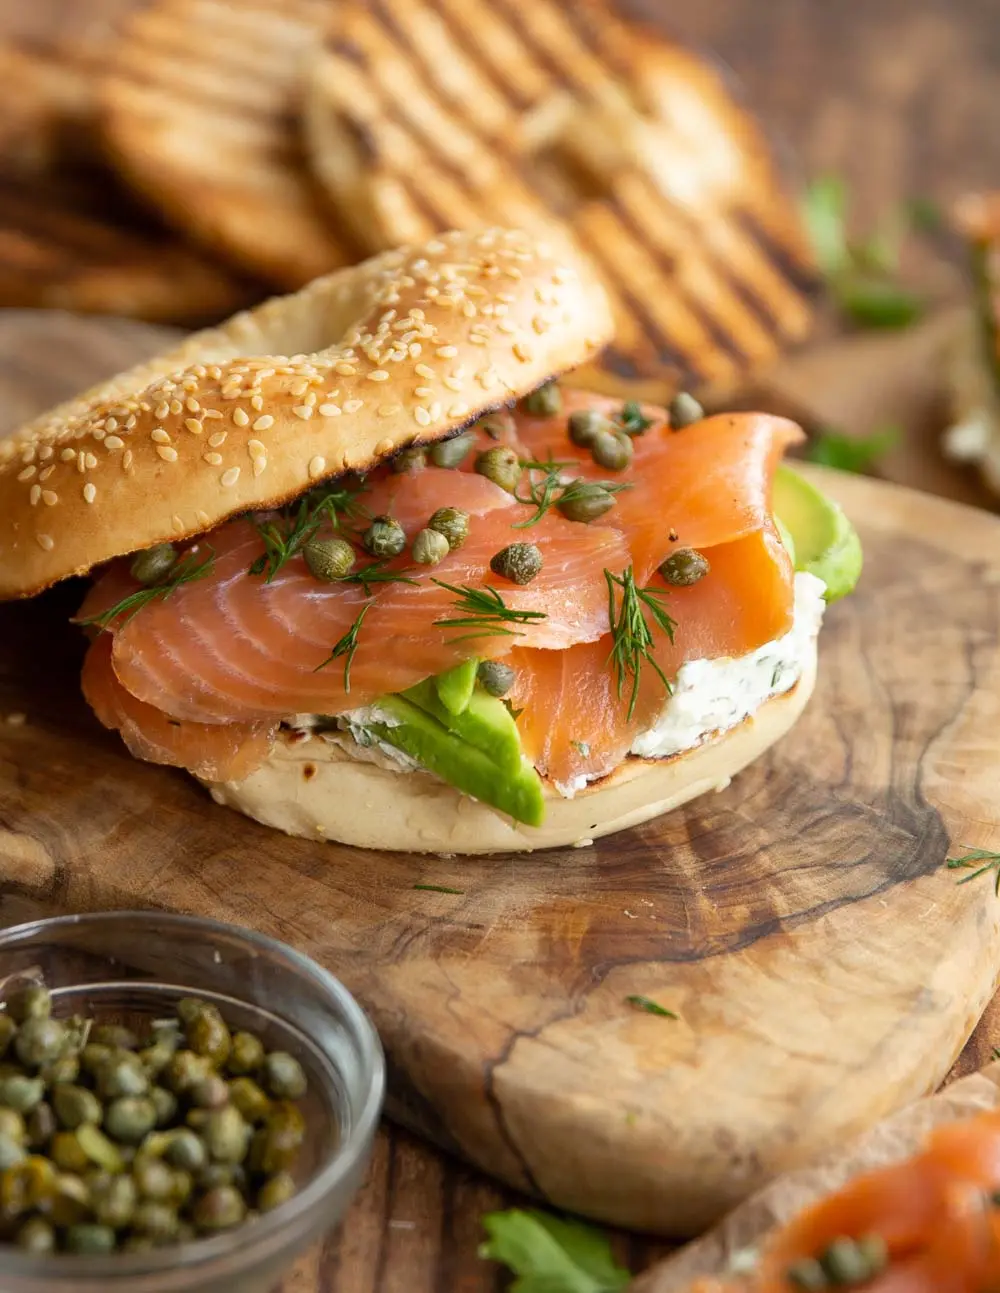 best bagel for smoked salmon - What bagel goes best with lox